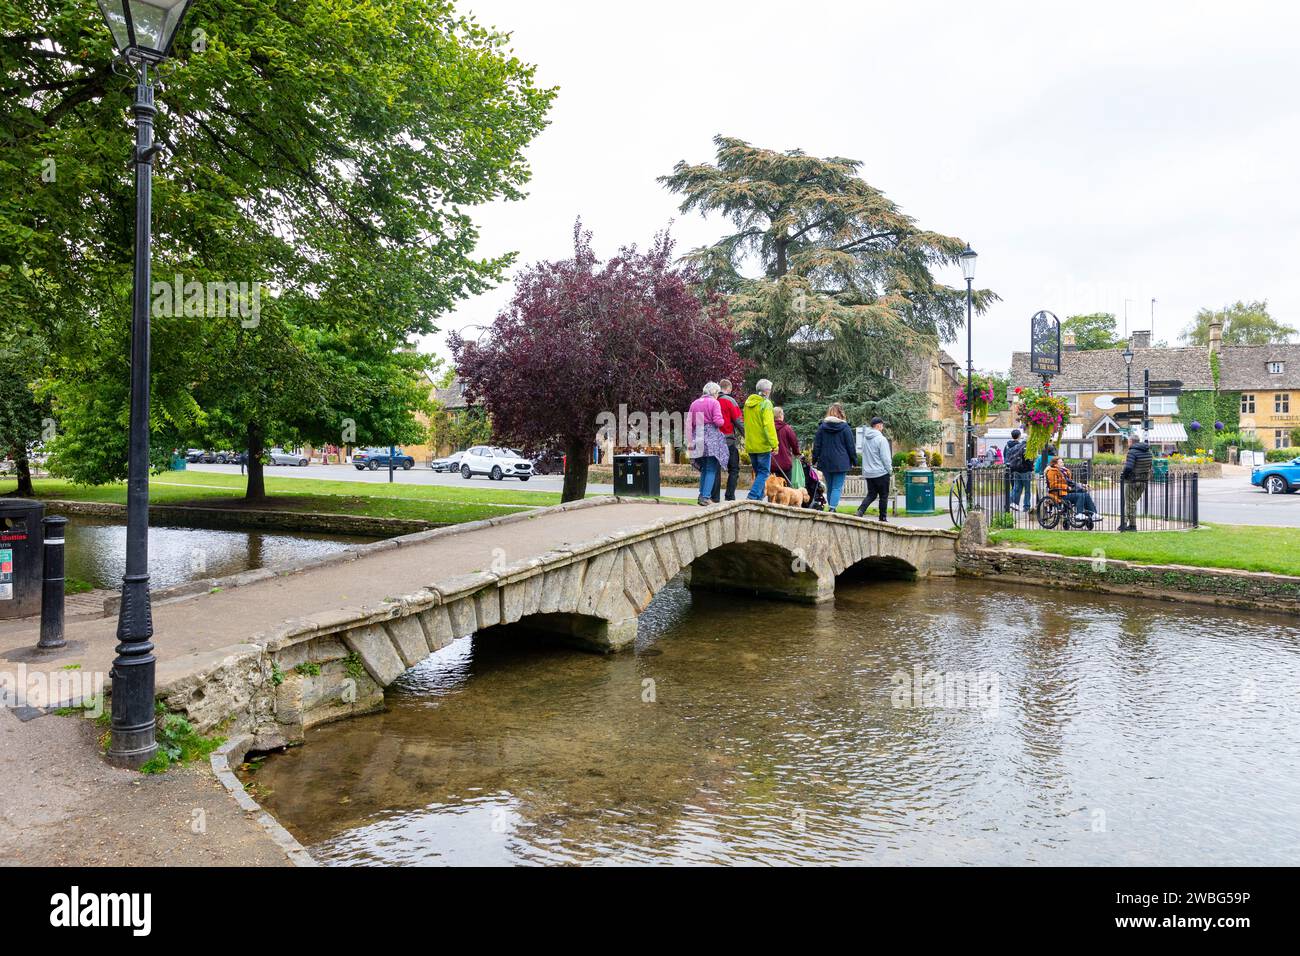 Cotswolds England , people with dogs walk across one of the low stone bridges in Bourton on the Water village, crossing the River Windrush, England,UK Stock Photo